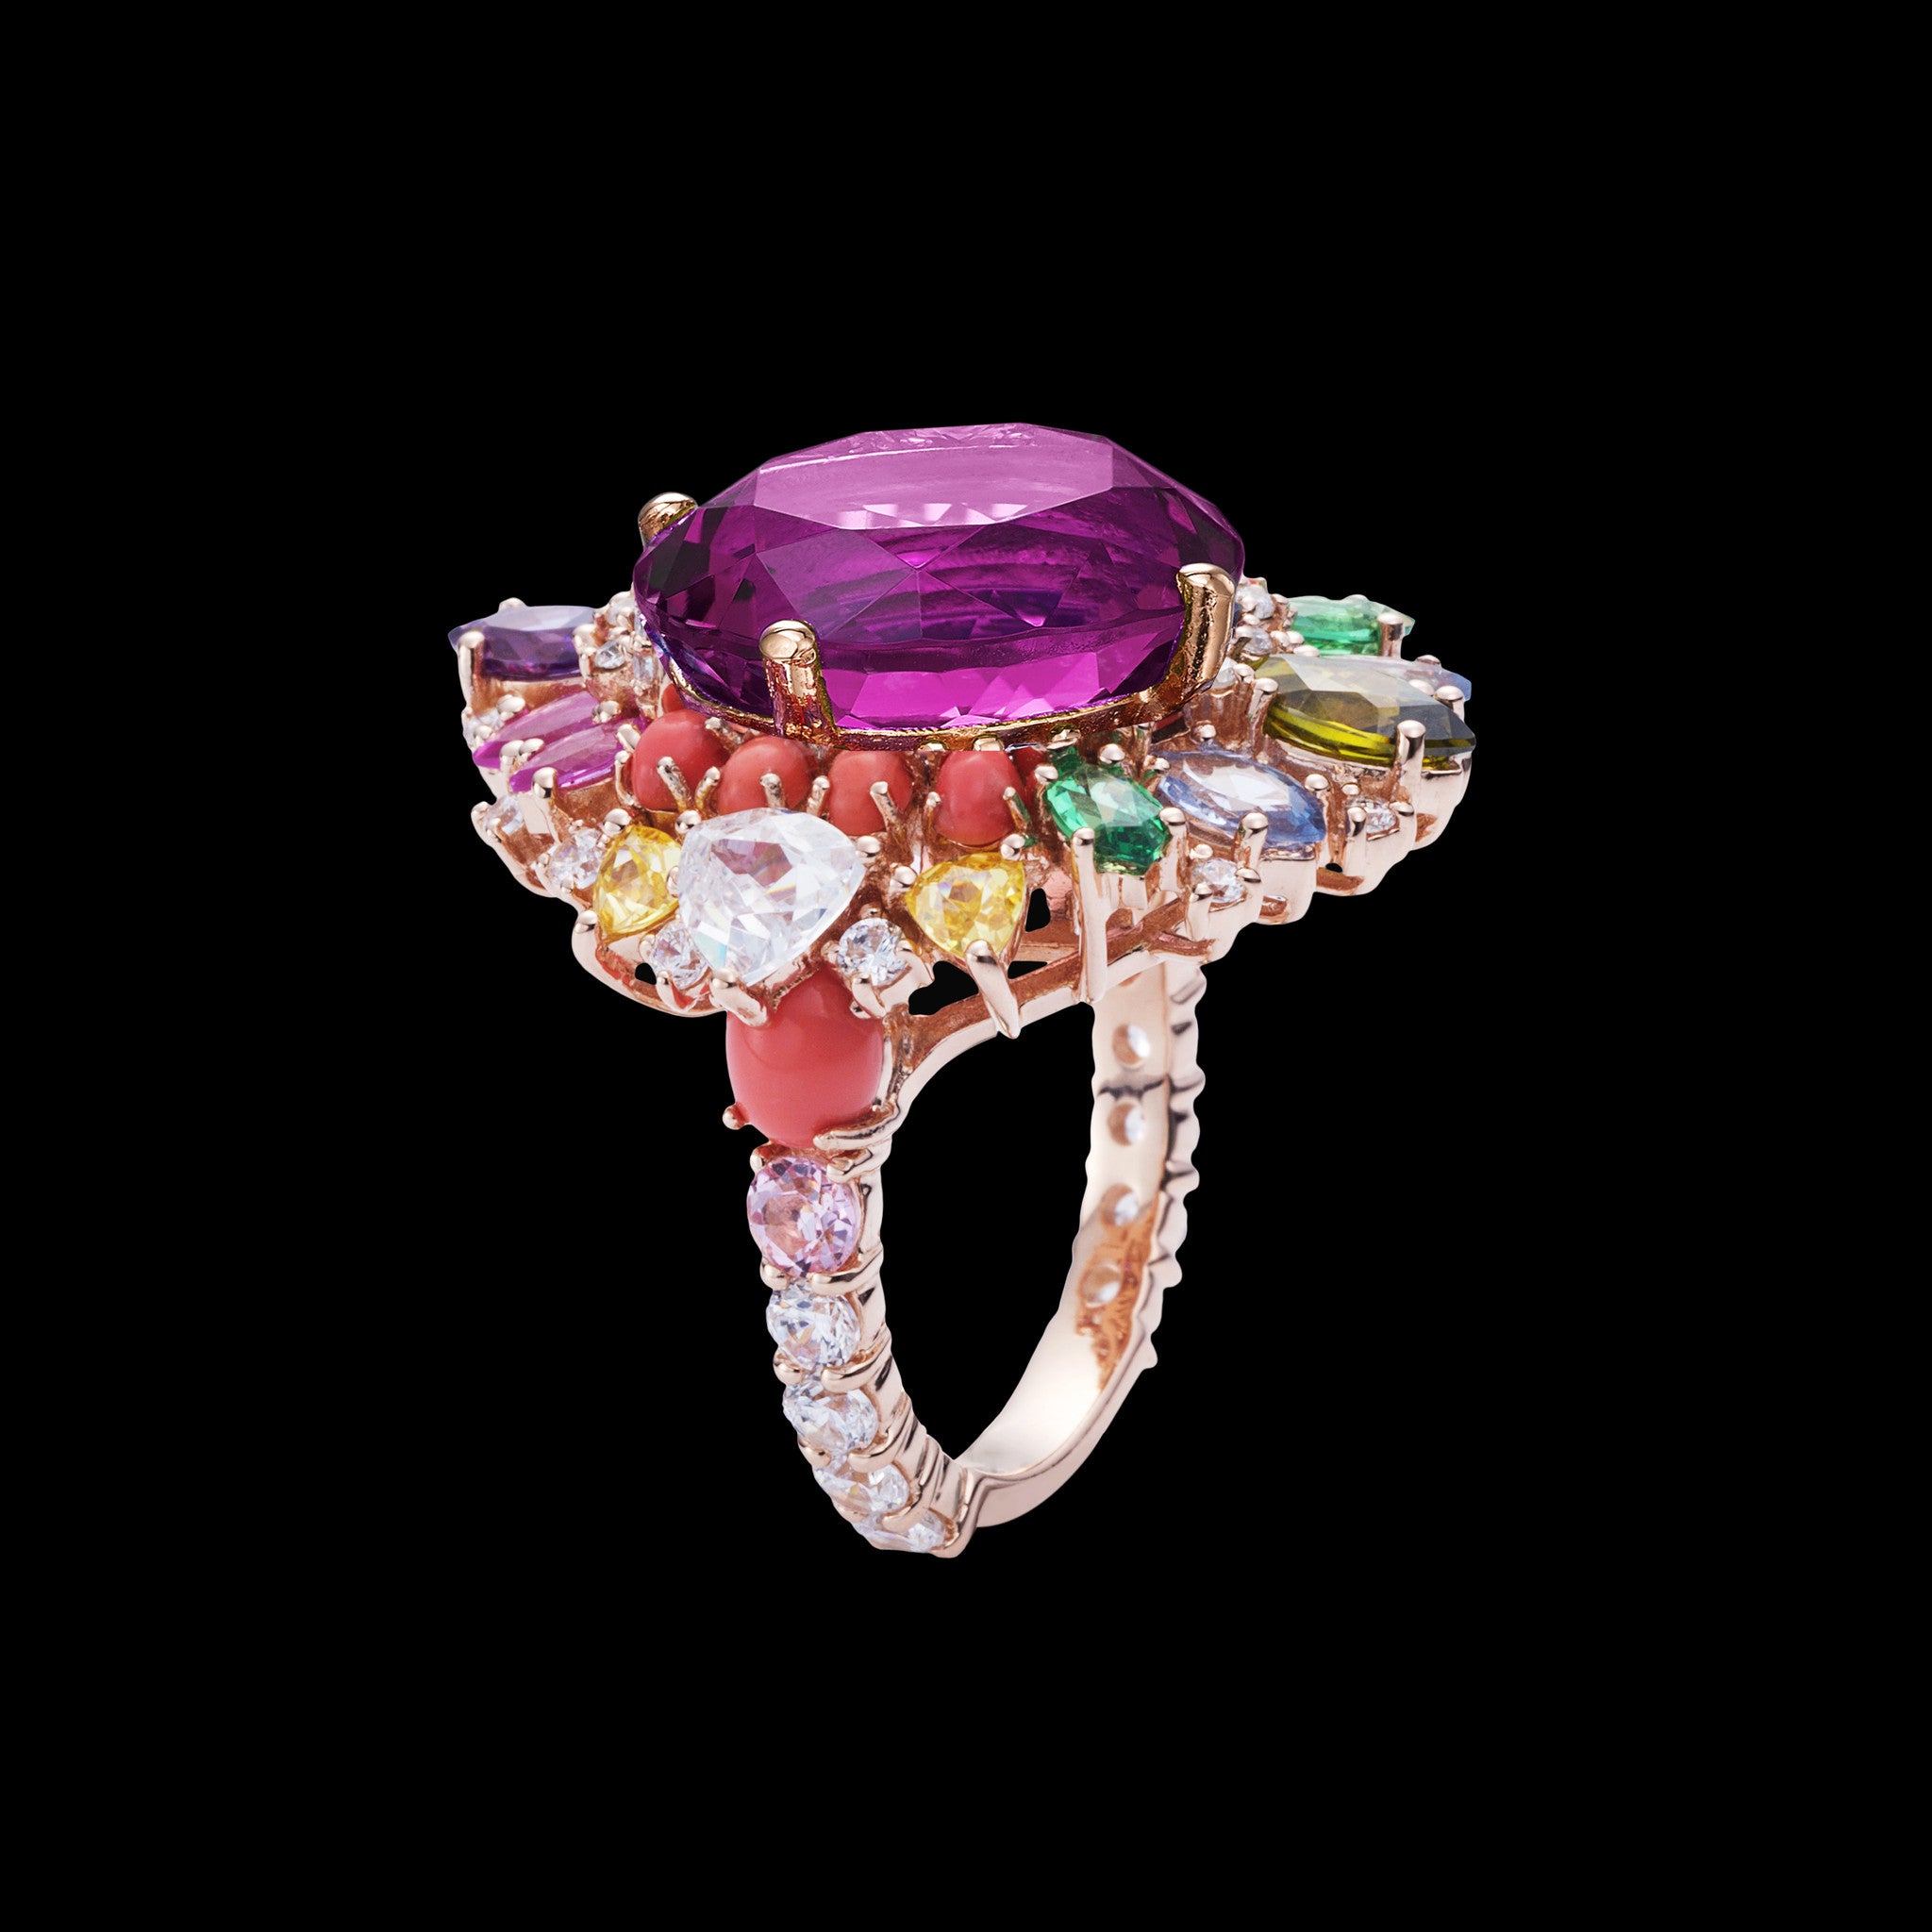 Rose Nereides Ring, Ring, Anabela Chan Joaillerie - Fine jewelry with laboratory grown and created gemstones hand-crafted in the United Kingdom. Anabela Chan Joaillerie is the first fine jewellery brand in the world to champion laboratory-grown and created gemstones with high jewellery design, artisanal craftsmanship and a focus on ethical and sustainable innovations.